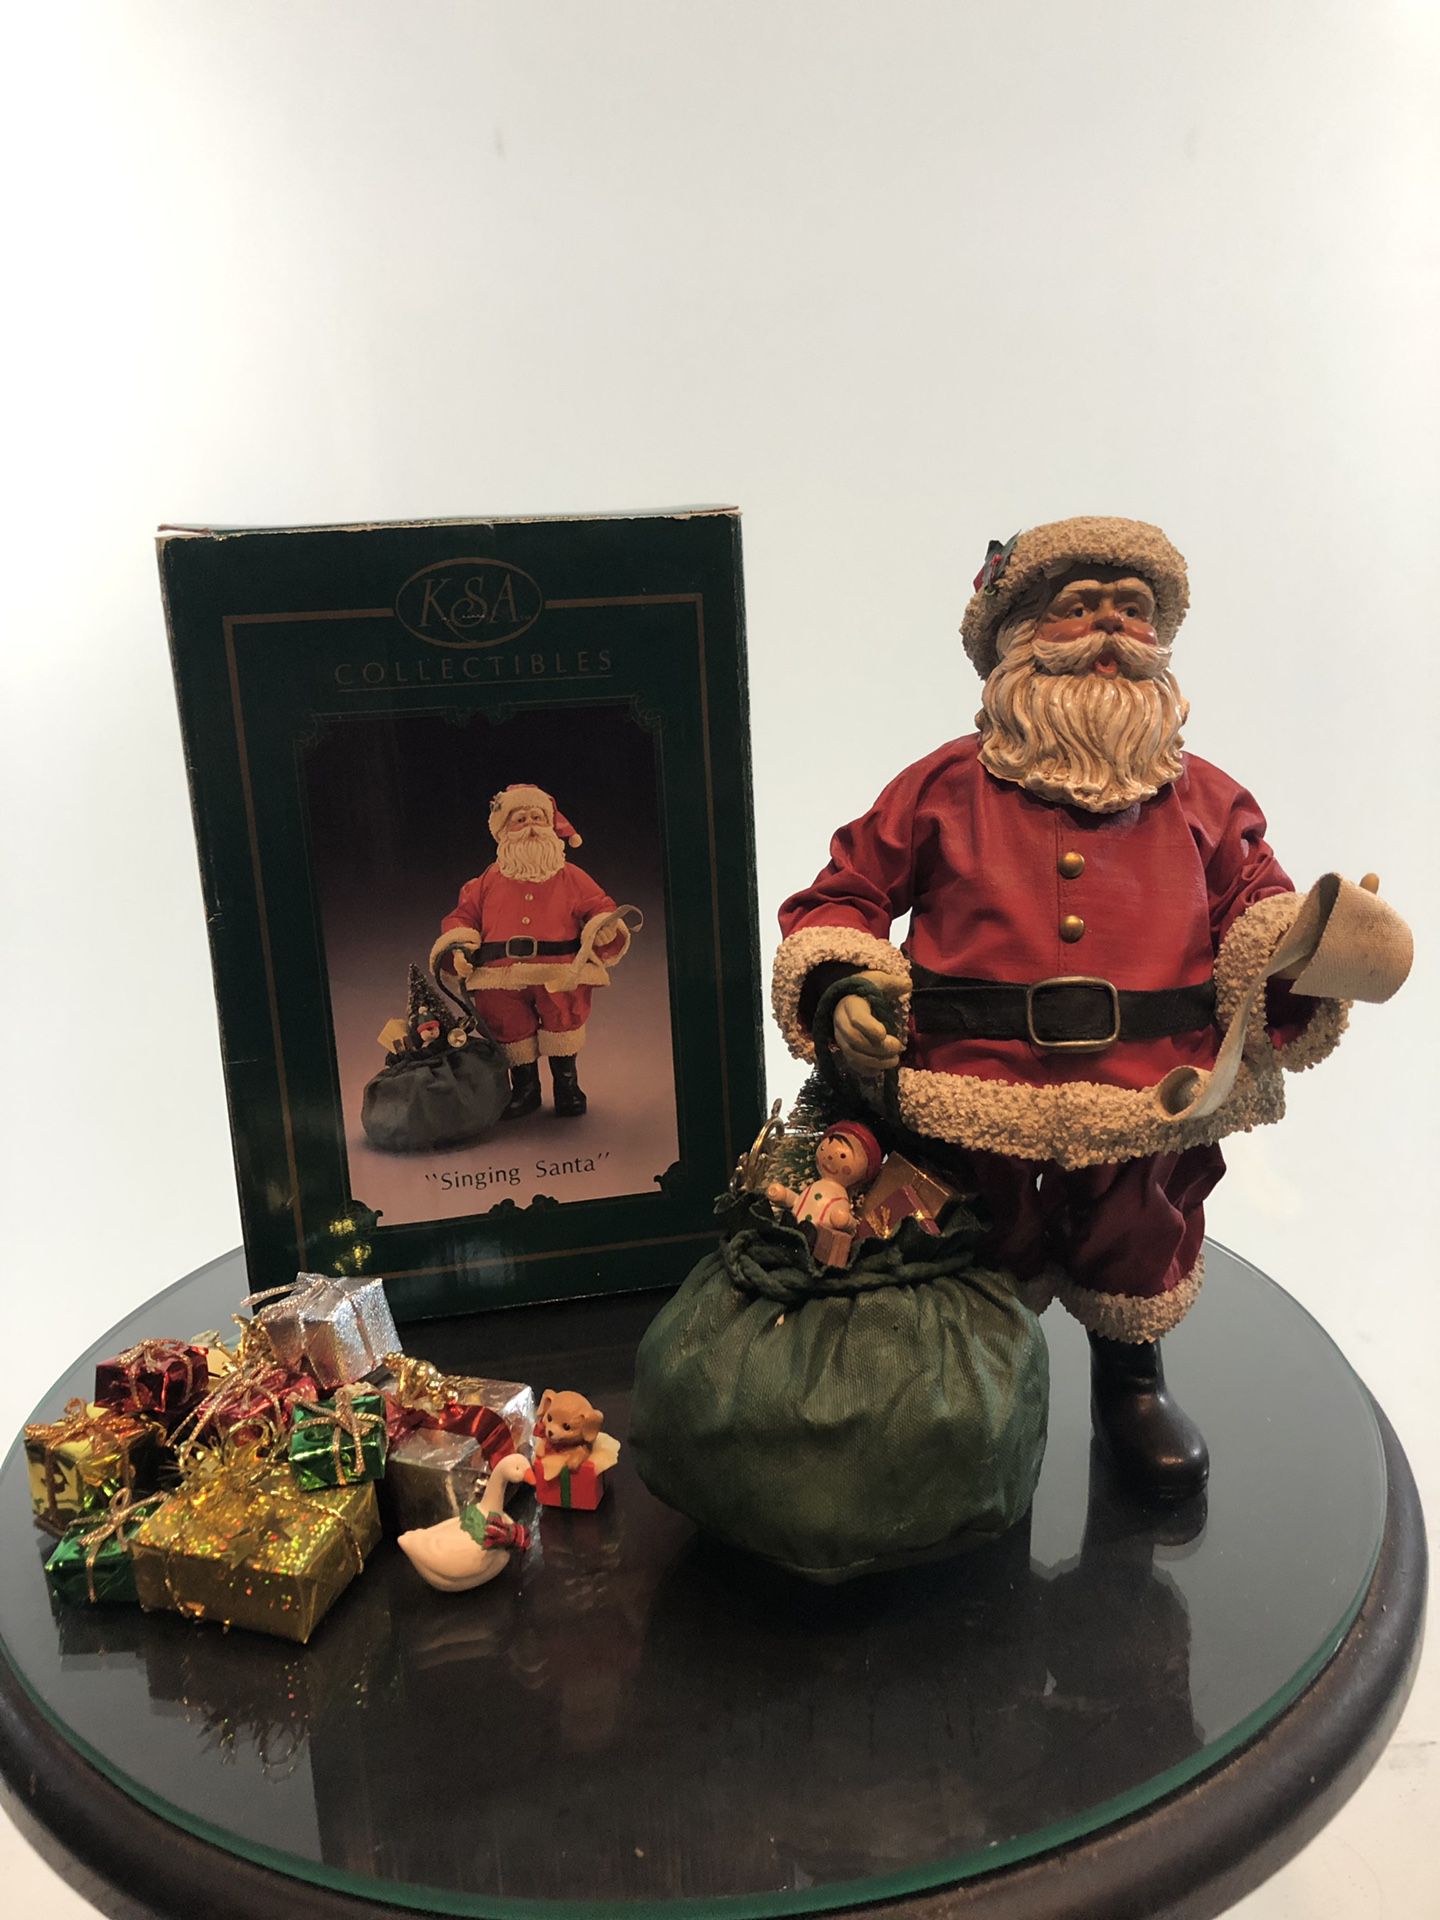 KSA Collectibles Singing Santa with additional Toy Presents